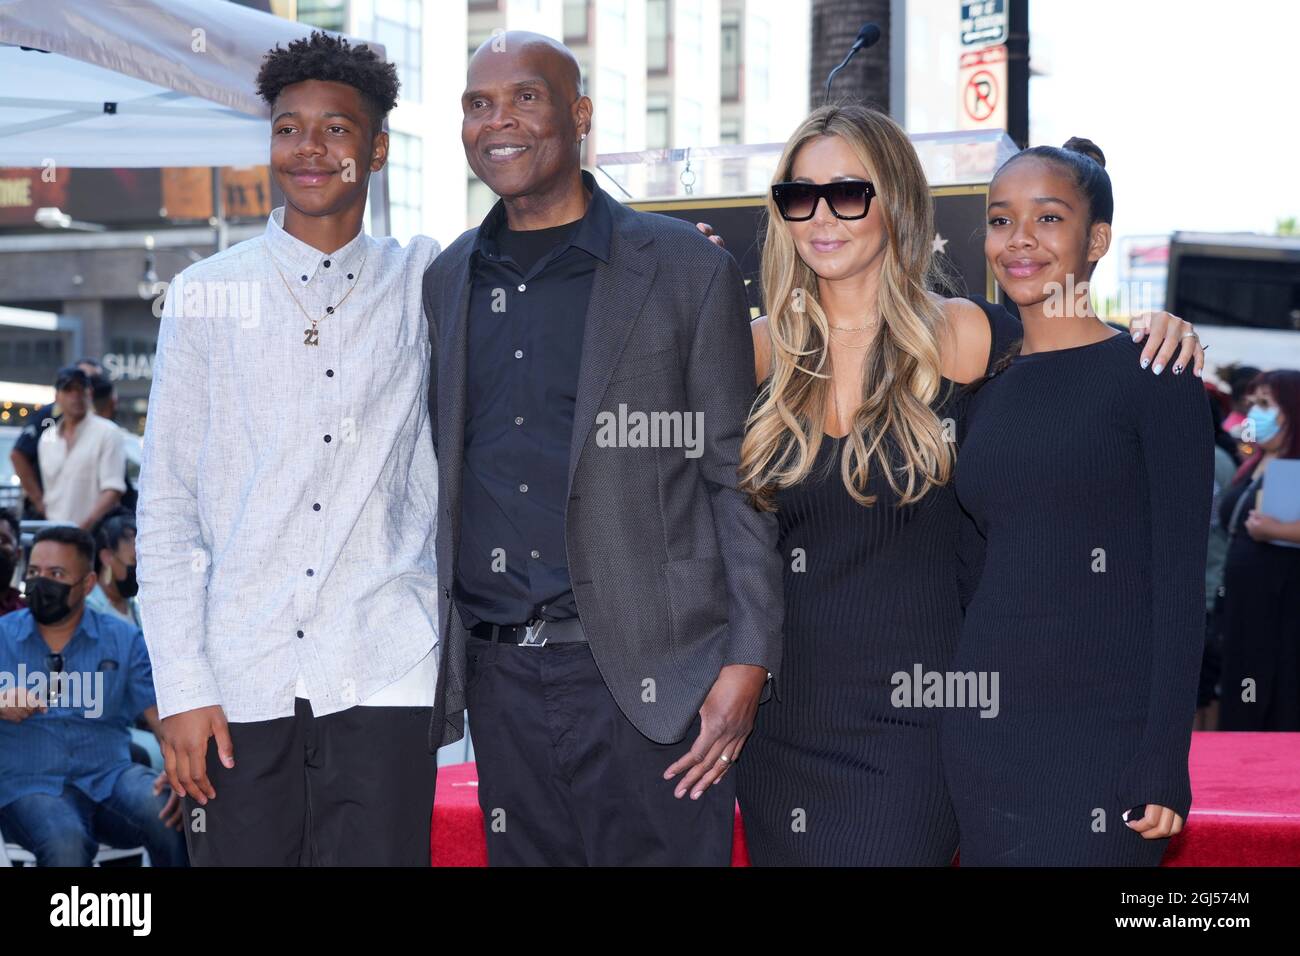 Hollywood, United States. 08th Sep, 2021. Radio personality Kurt Alexander  aka Big Boy (second from left) poses with son Jay Money Alexander (left),  wife Veronica Alexander (second from right) and daughter Jaide